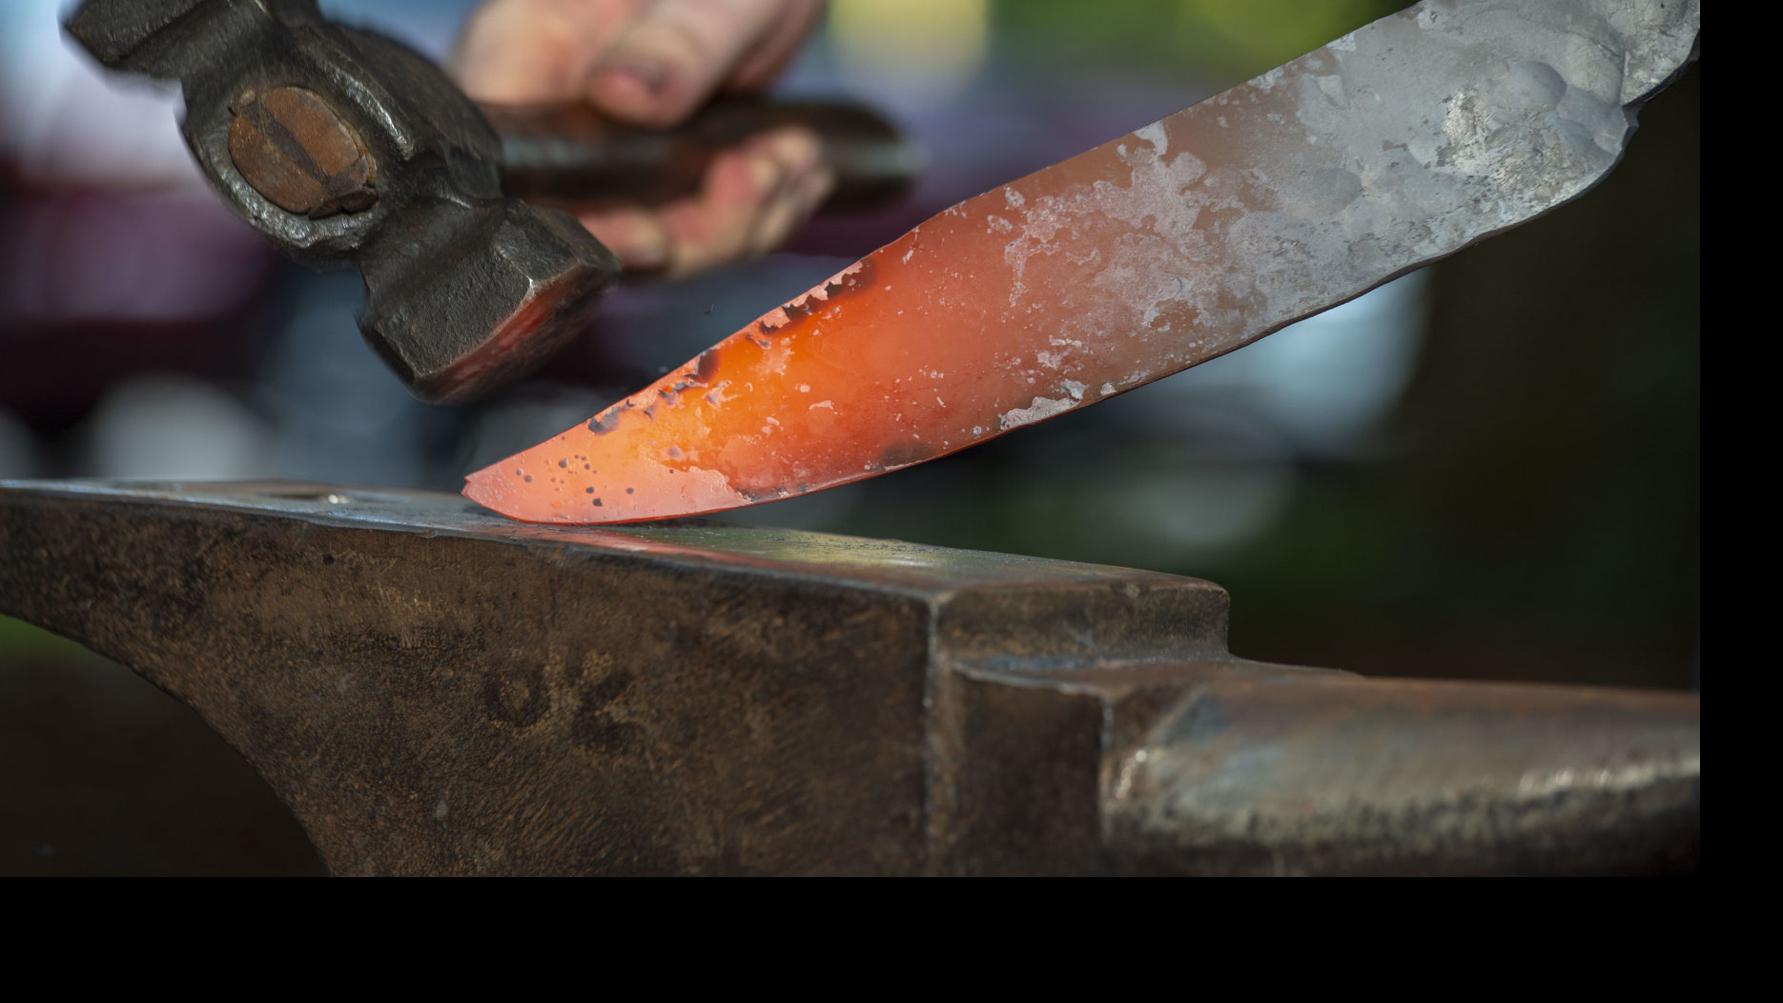 Photos, video: South African knife maker shows some of his forging techniques